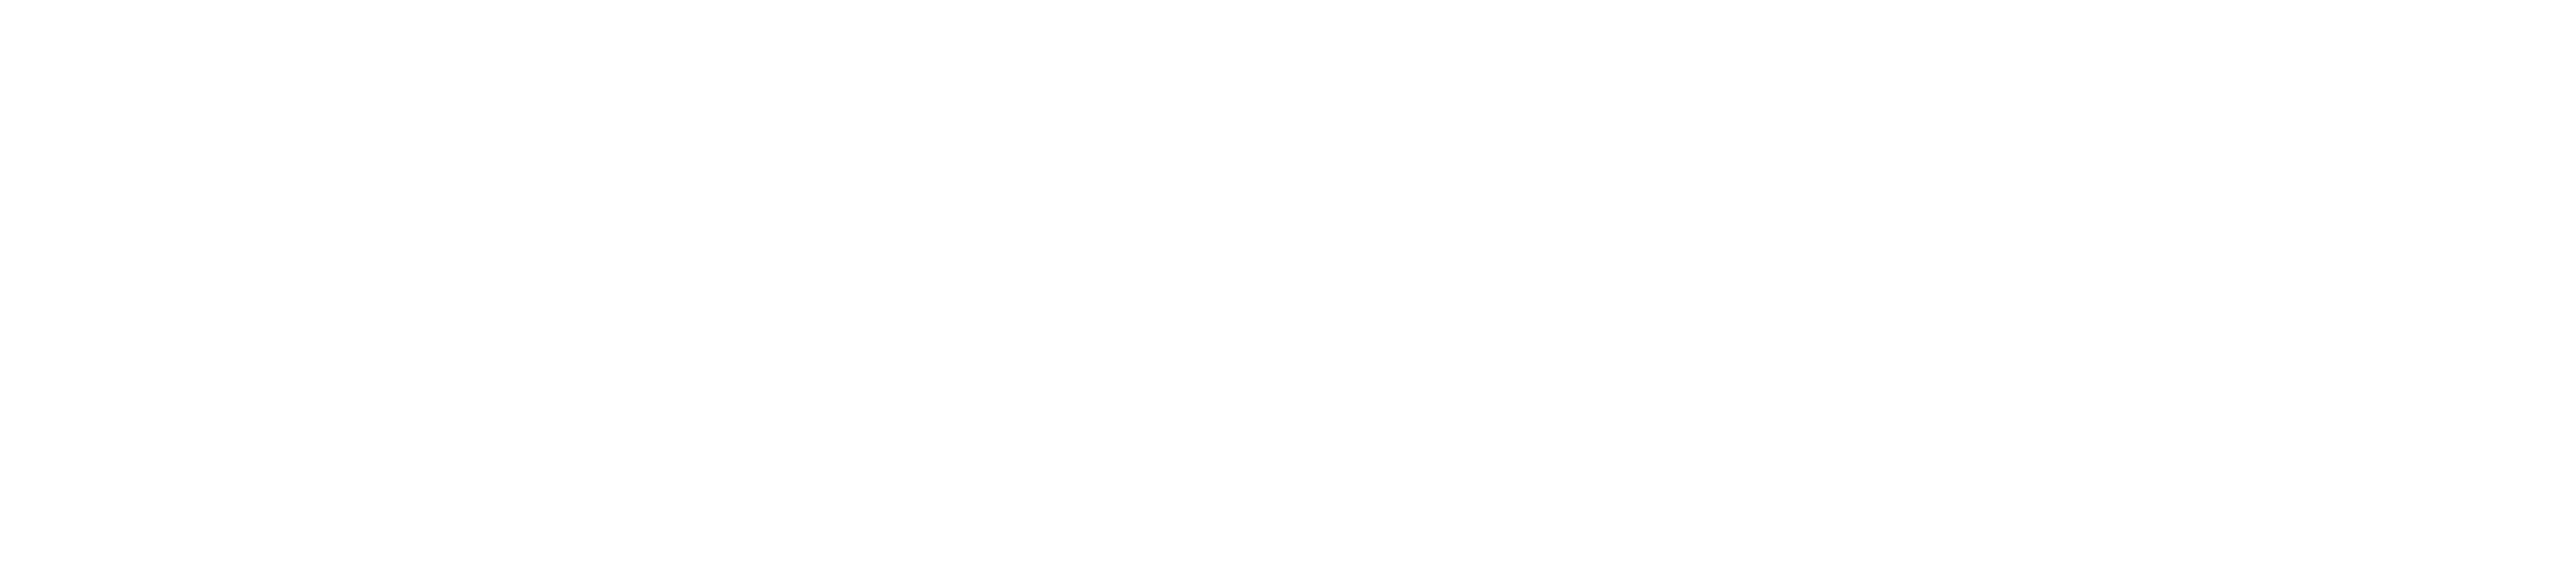 Captive Audience: A Real American Horror Story logo